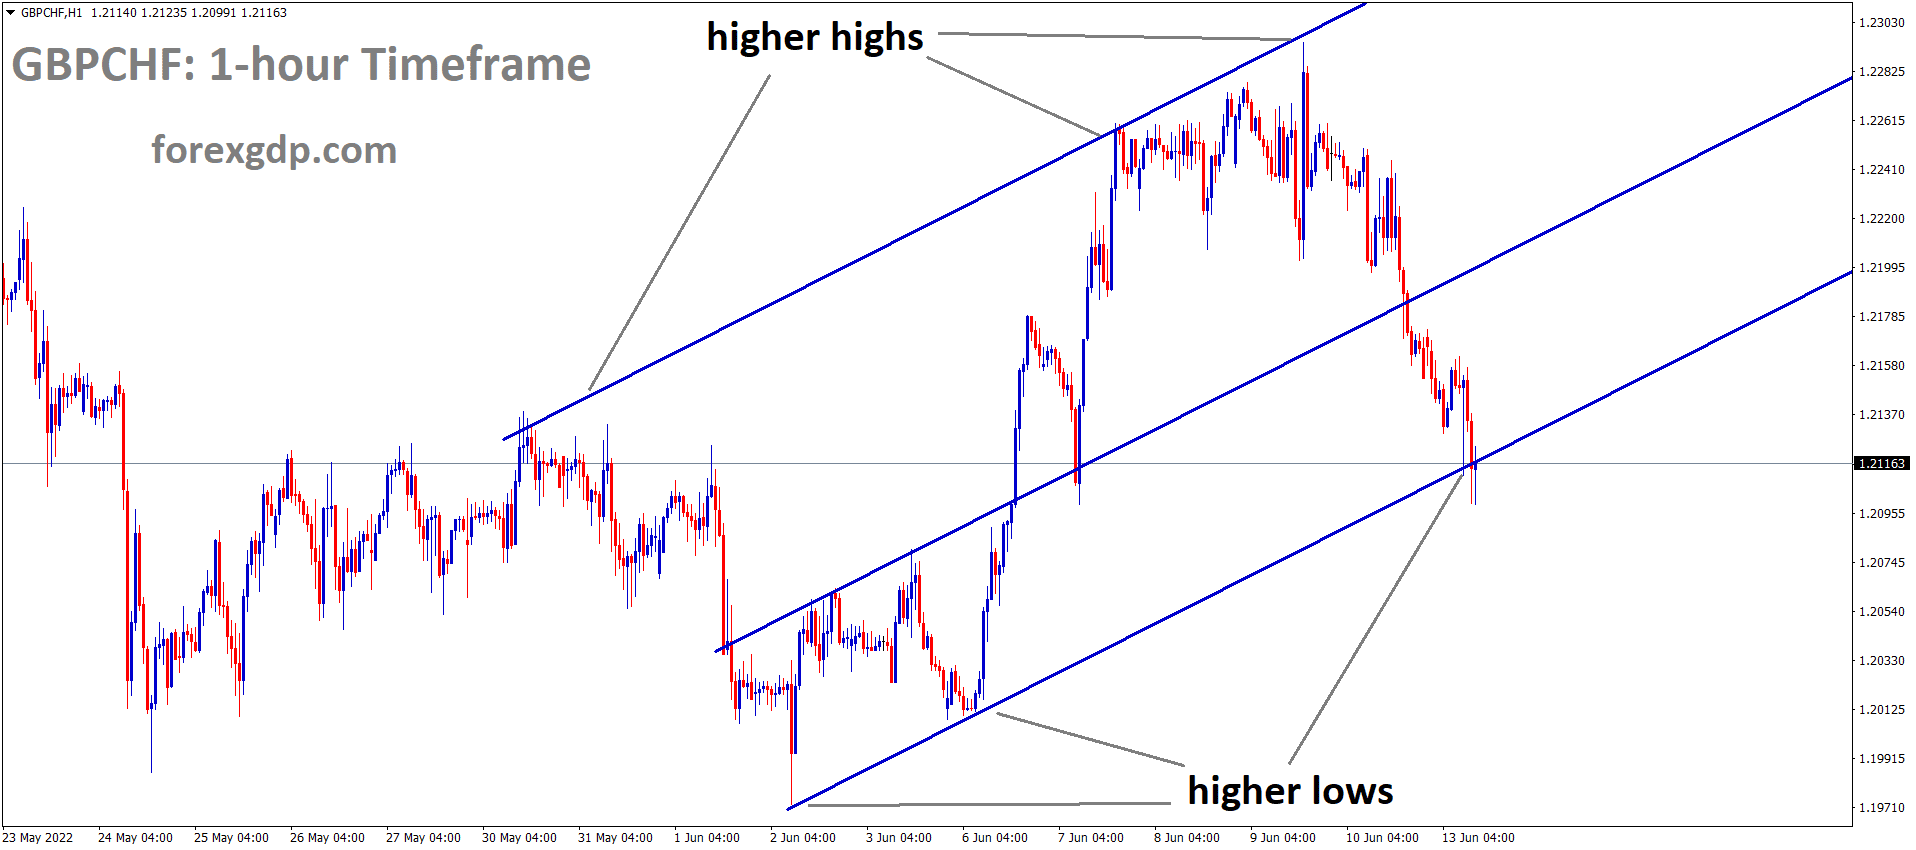 GBPCHF is moving in an Ascending channel and the Market has rebounded from the higher low area of the channel